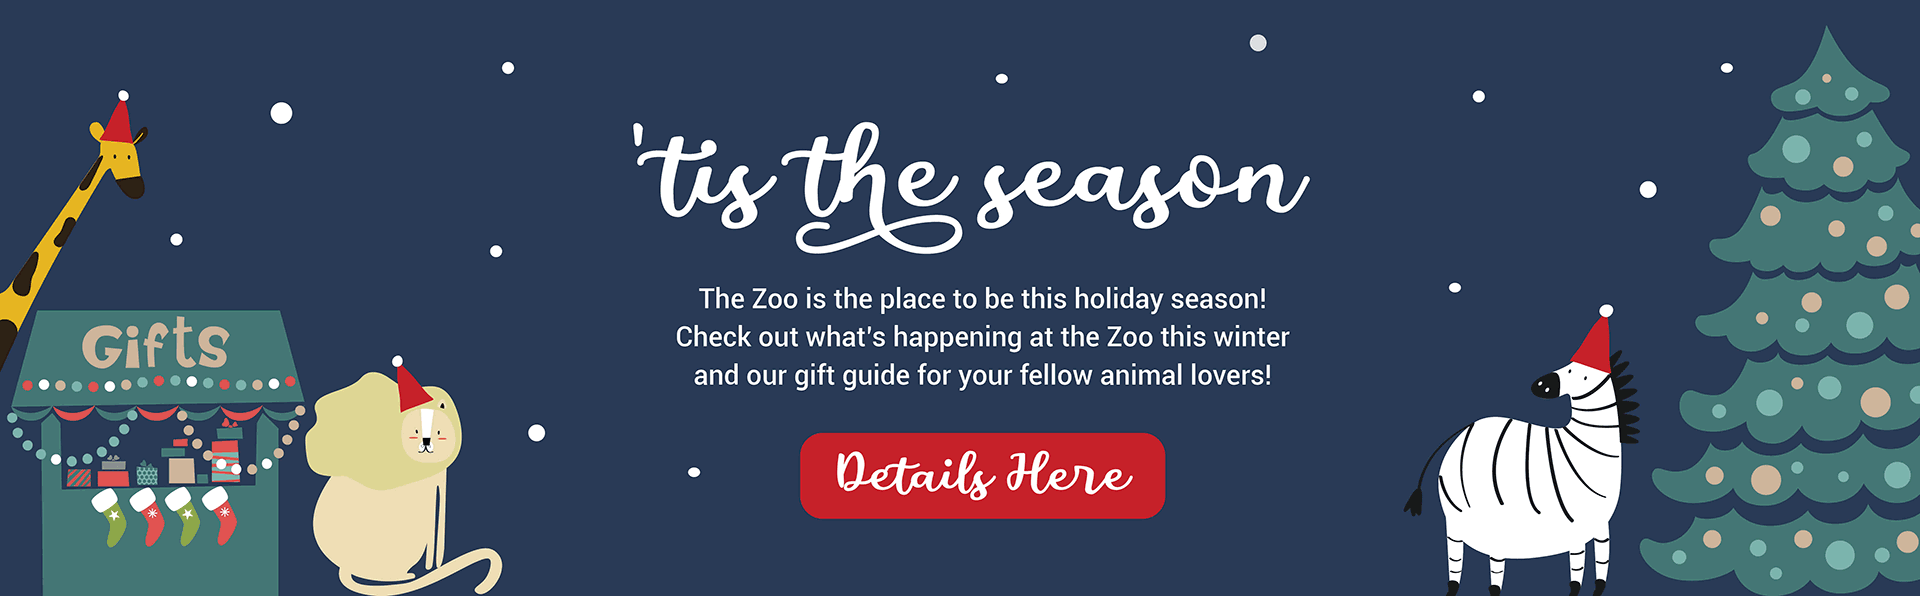 'tis the season. The Zoo is the place to be this holiday season! Check out what's happening at the Zoo this winter and our gift guide for your fellow animal lovers!